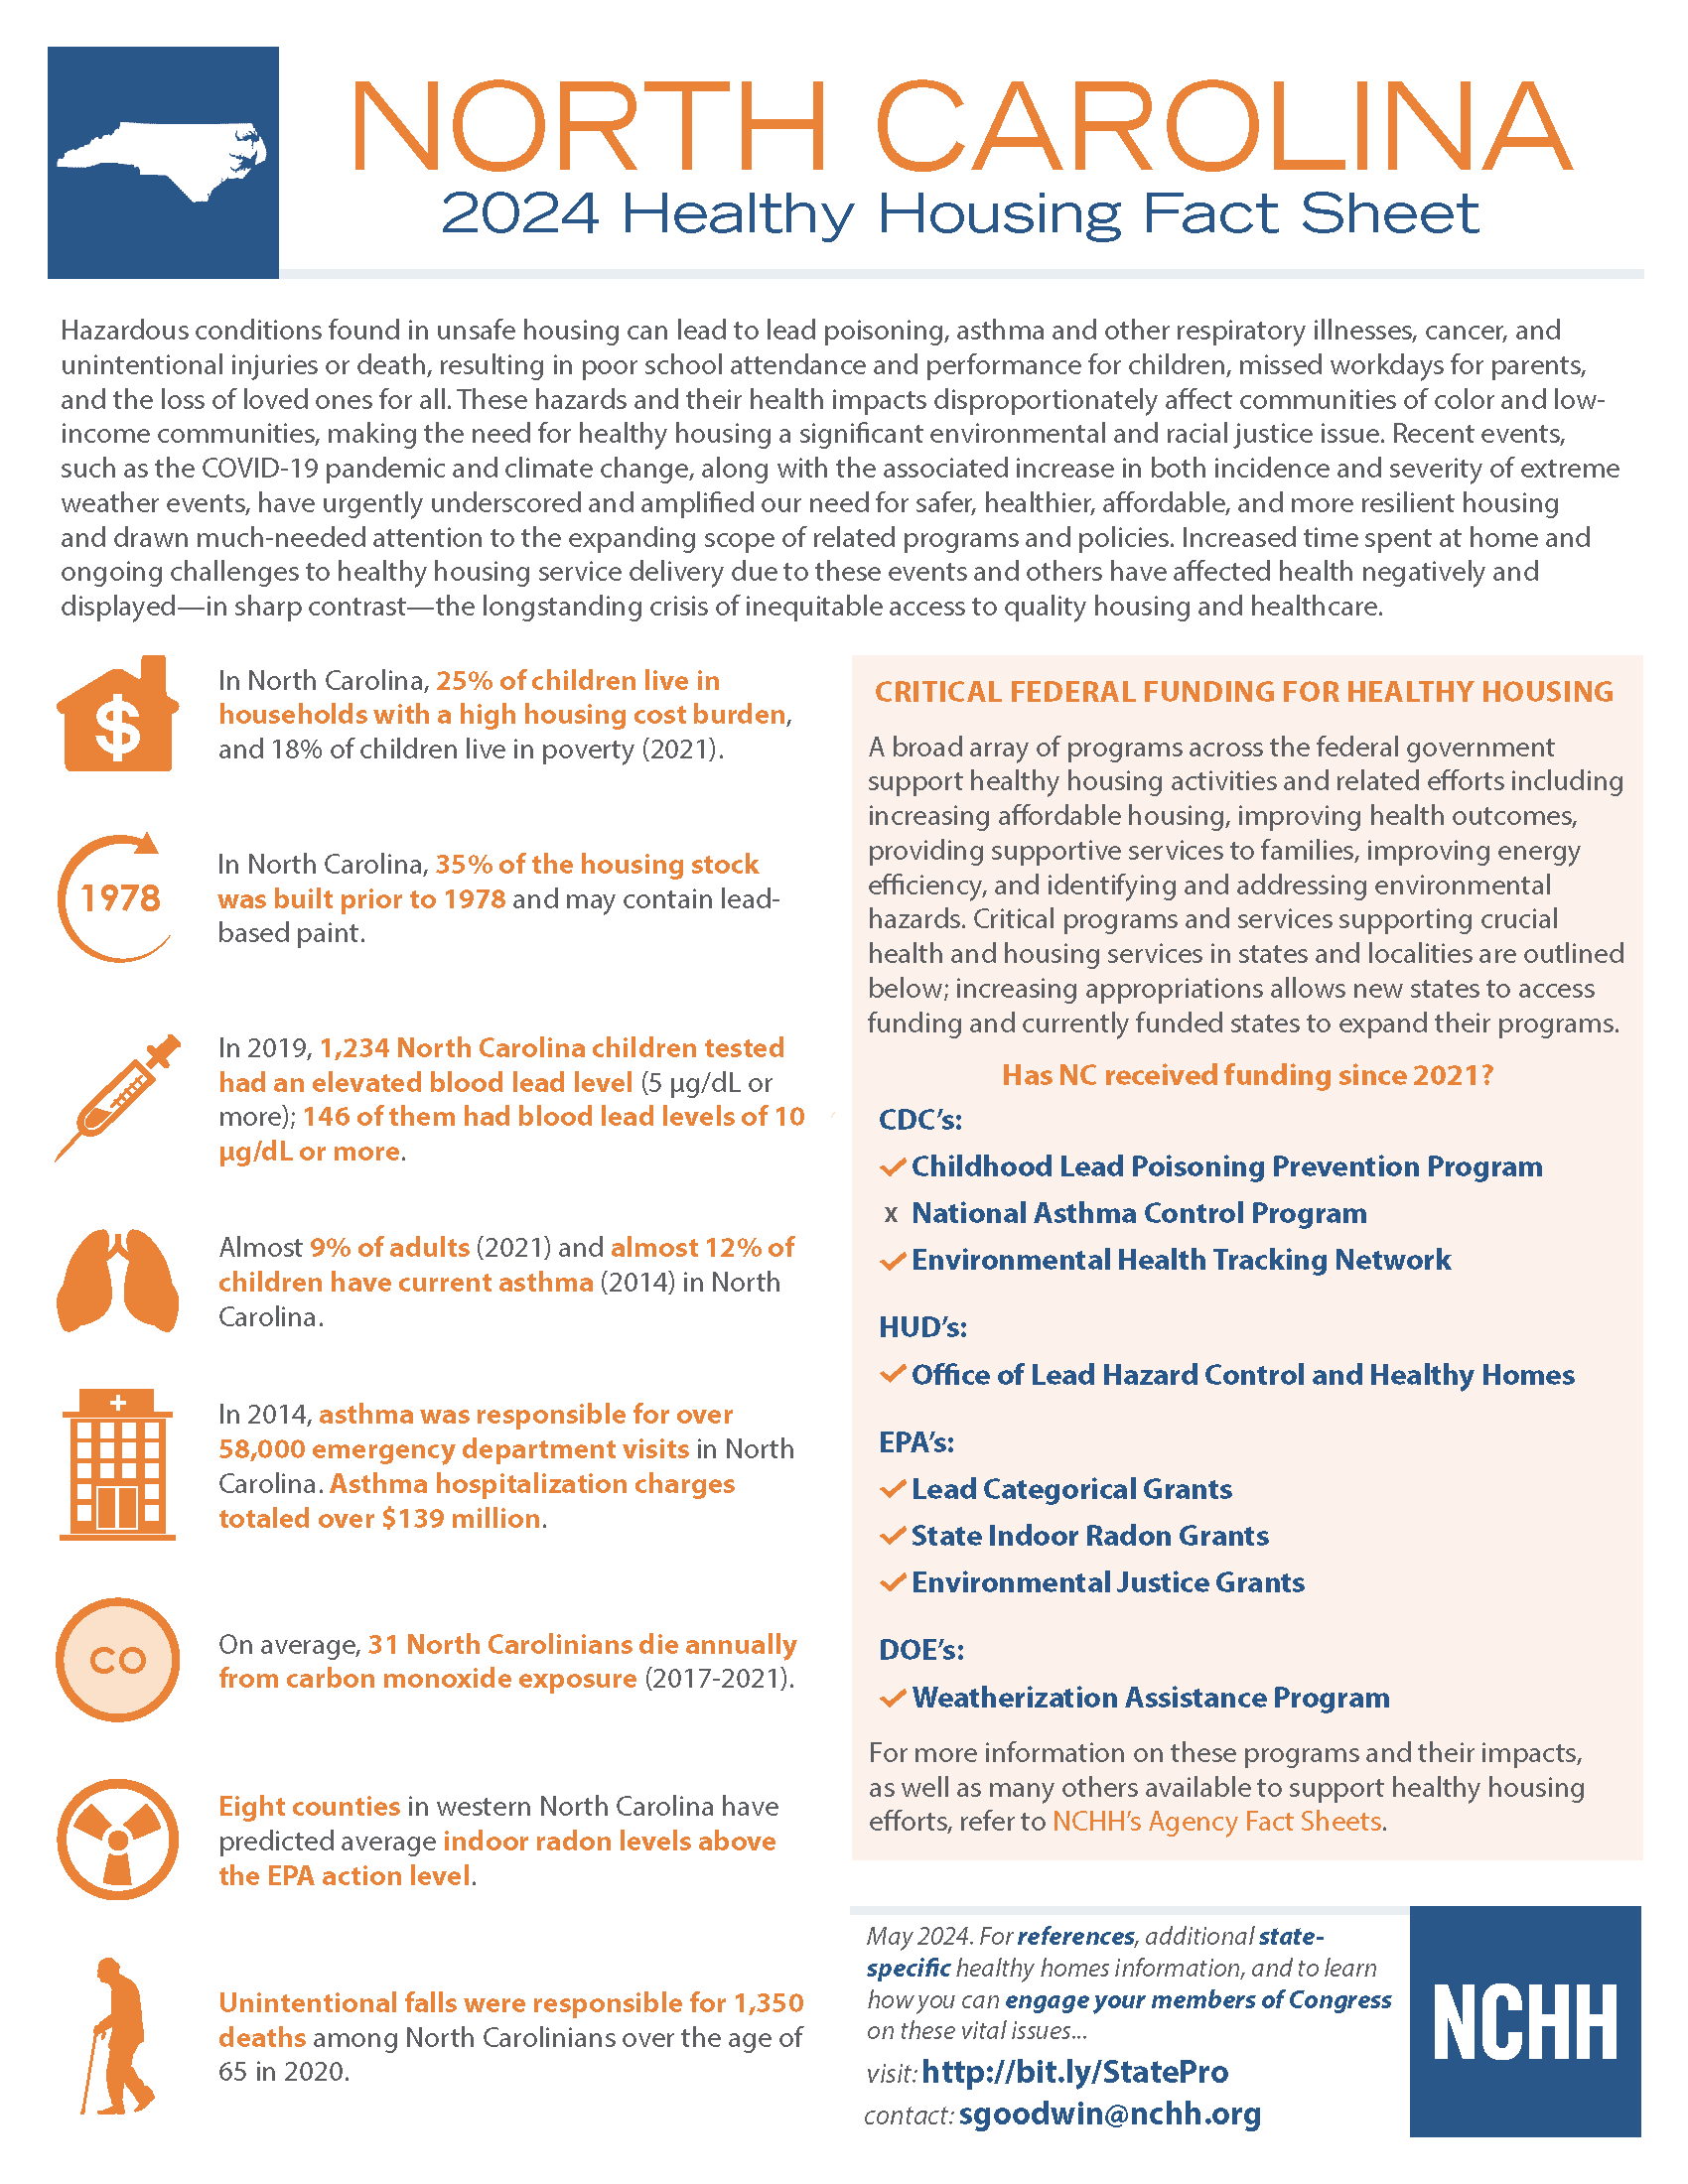 Fact sheet describing the overall environmental health of the state of North Carolina.